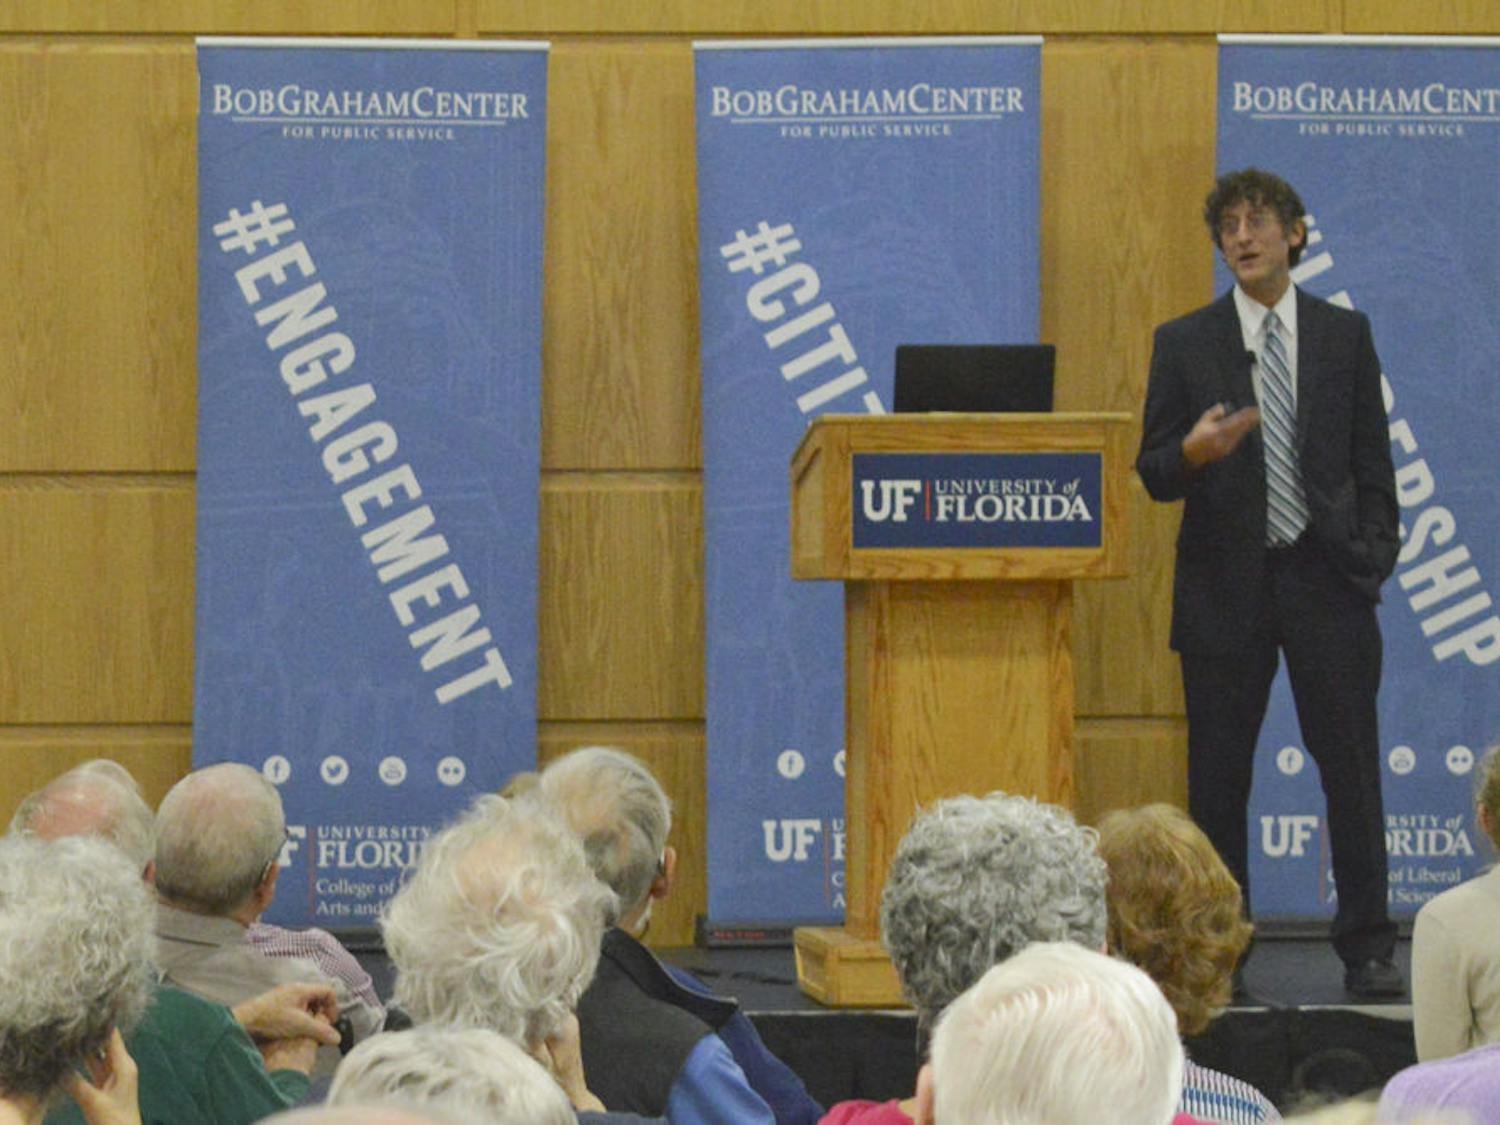 Jonathan Oberlander, professor of Social Medicine at the University of North Carolina at Chapel Hill, discusses the details of the Affordable Care Act, Medicare and health care reform to a full audience at the Bob Graham Center on Tuesday. "Maybe the most important thing to understand about the Affordable Care Act is that, in a fundamental way, it is incremental," Oberlander said. "Yes, it is ambitious – it does things that we have never done in this country before."